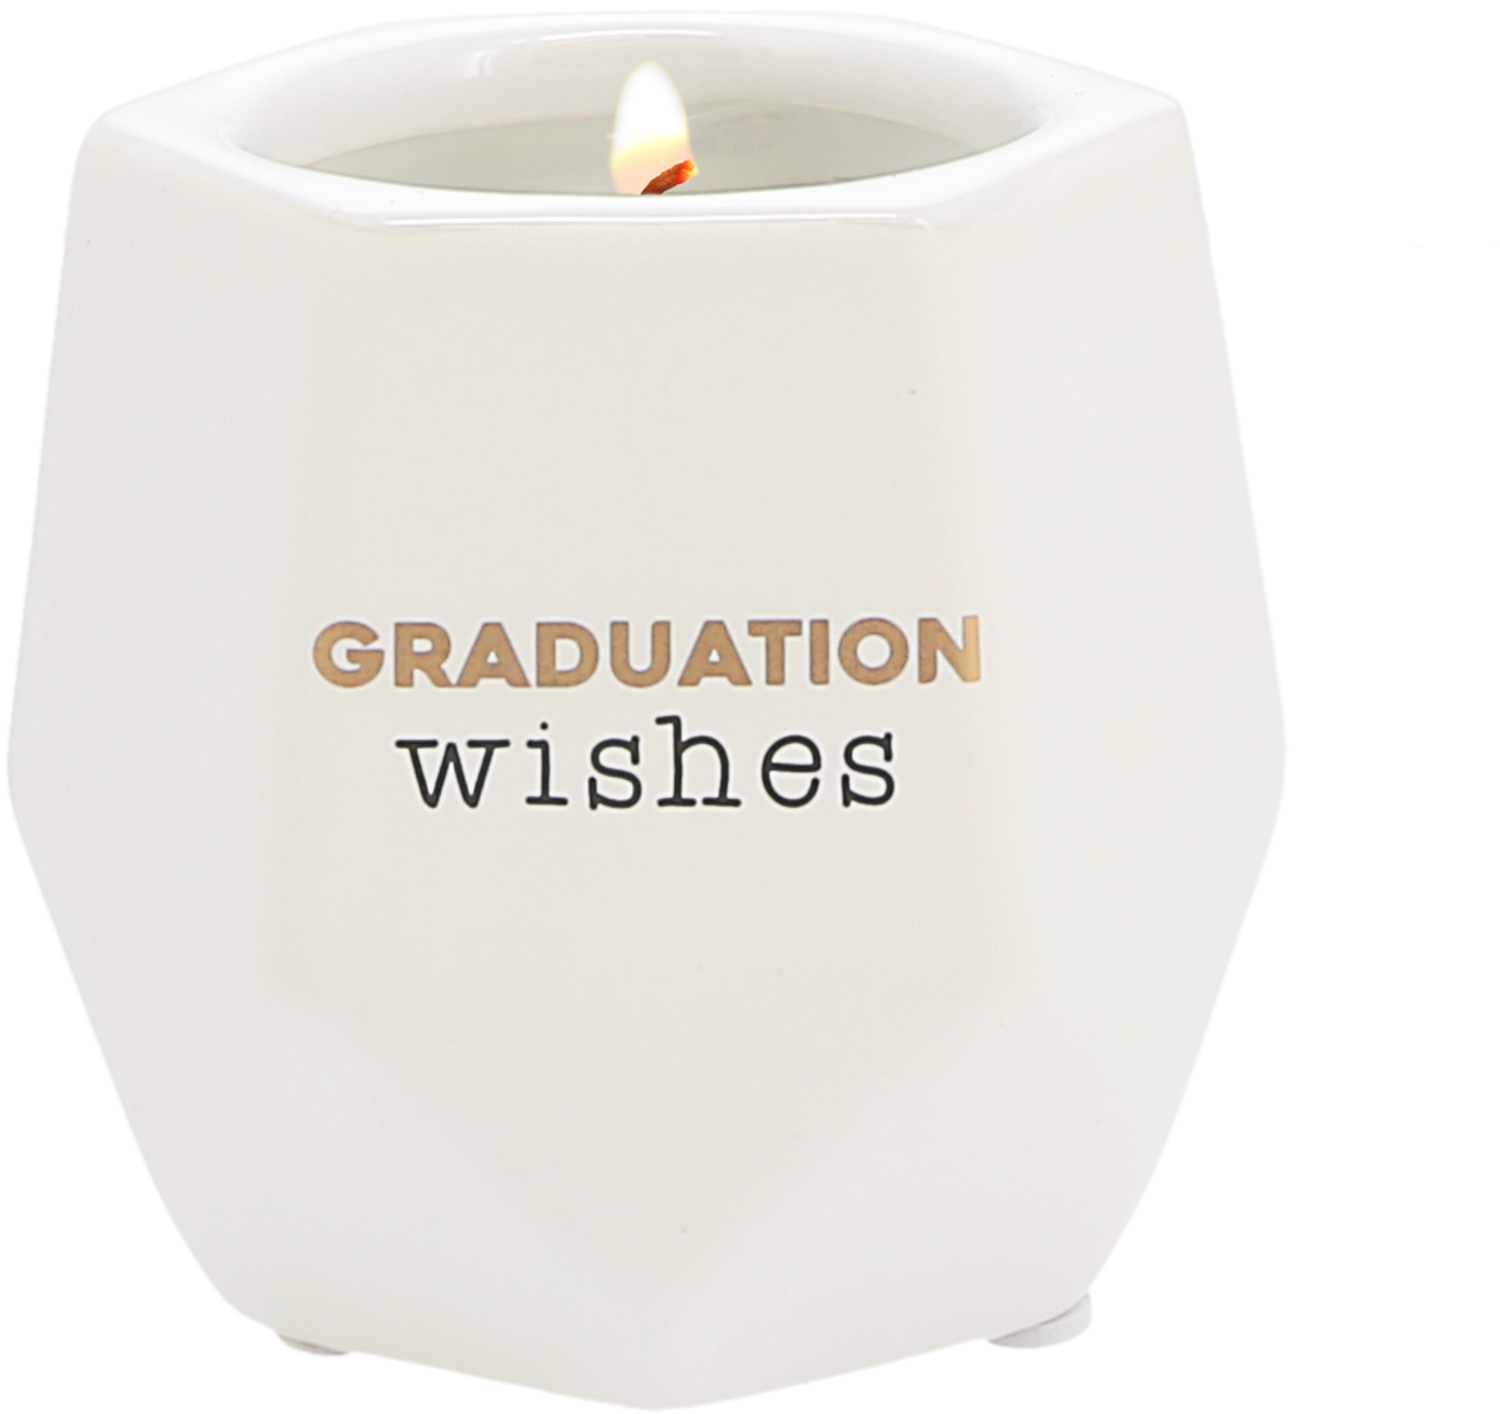 Graduation Wishes by Happy Confetti to You - Graduation Wishes - 8 oz - 100% Soy Wax Candle
Scent: Tranquility